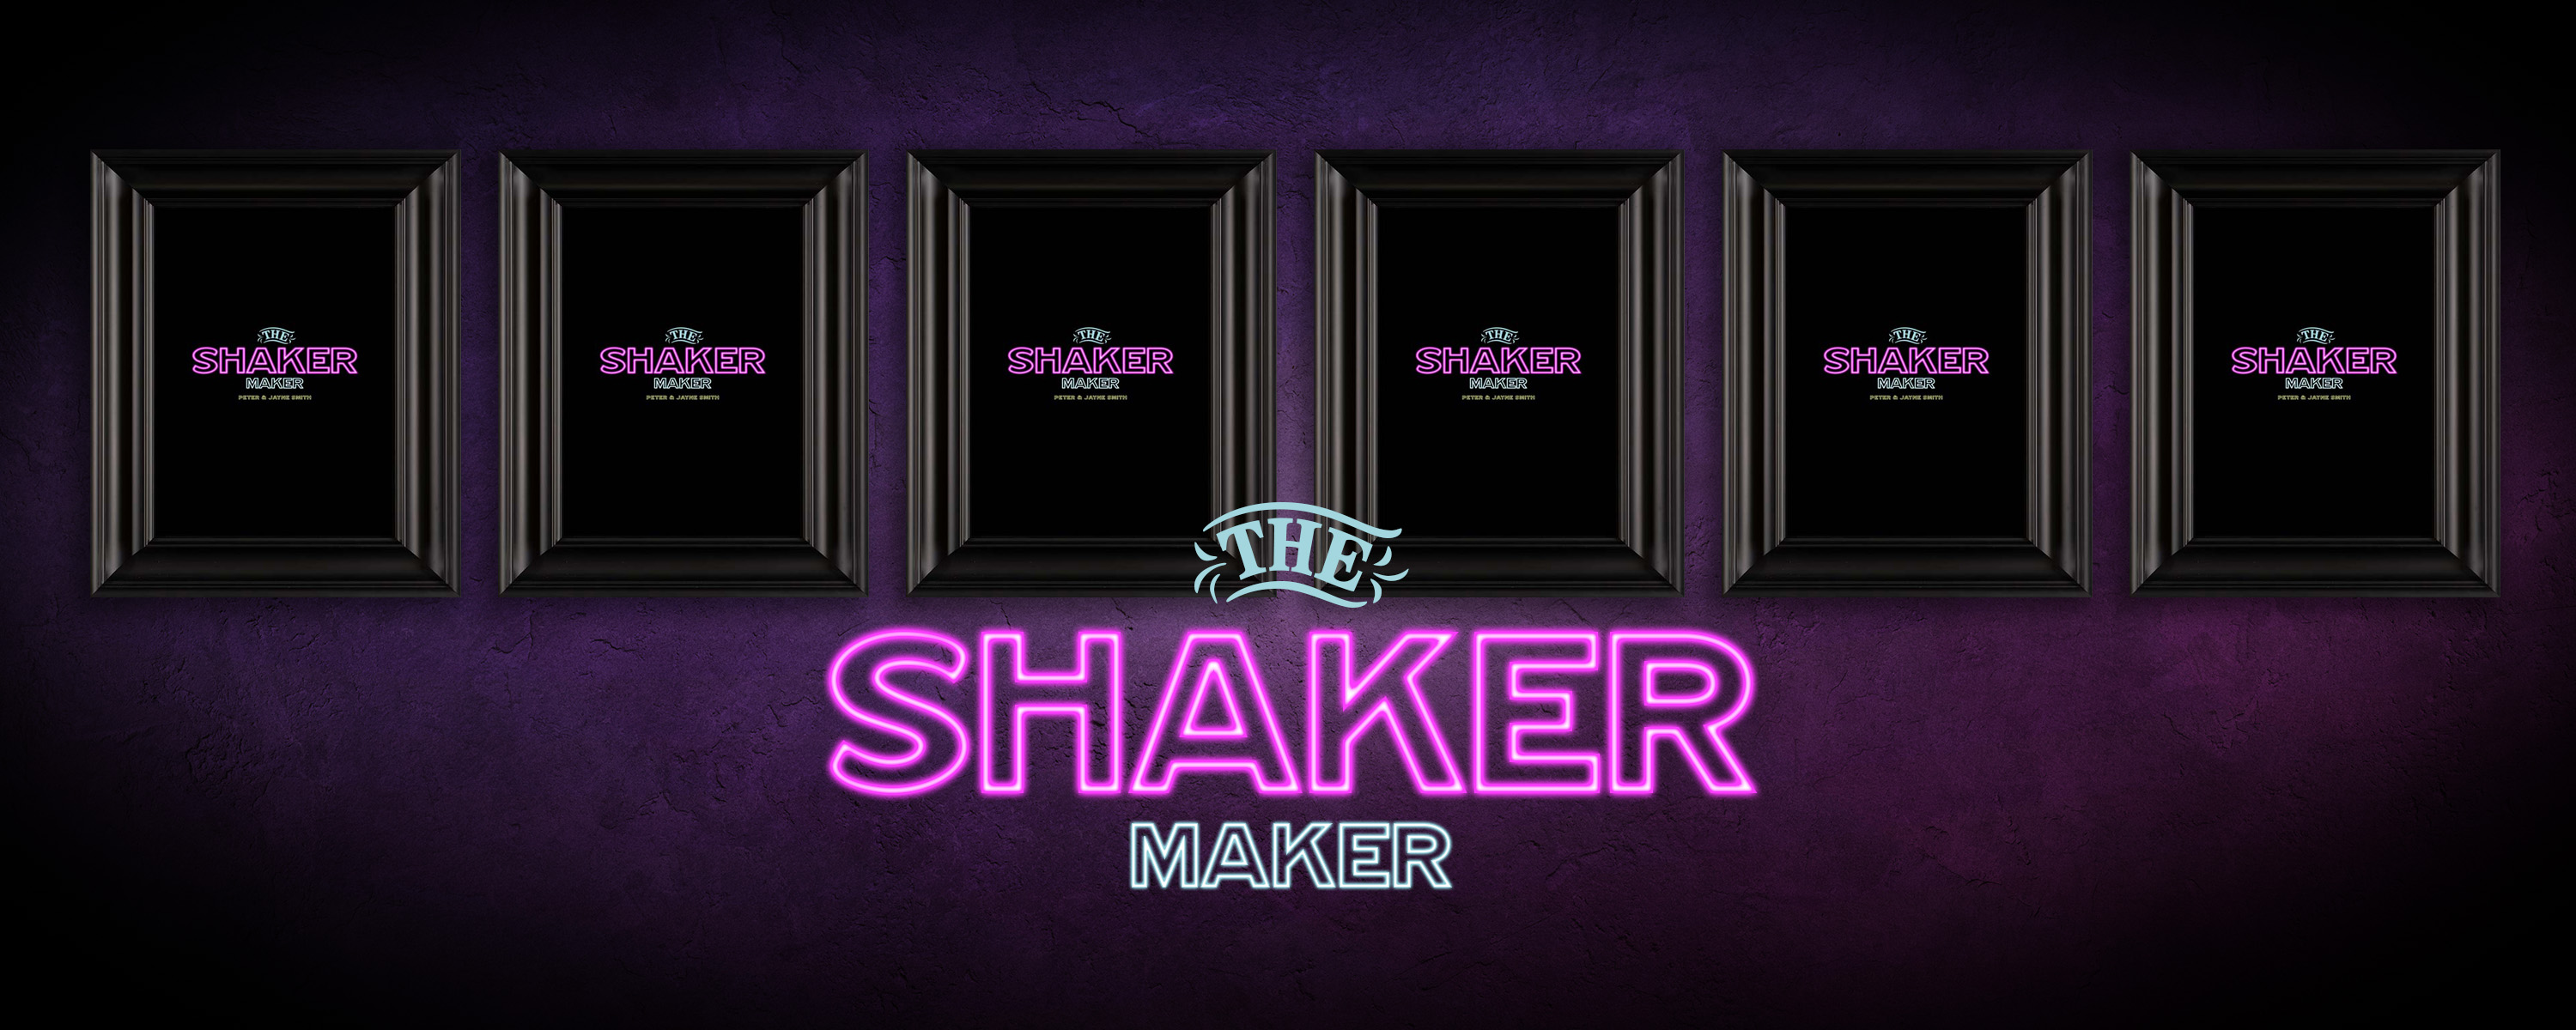 Watch Out - It's The Shaker Maker!